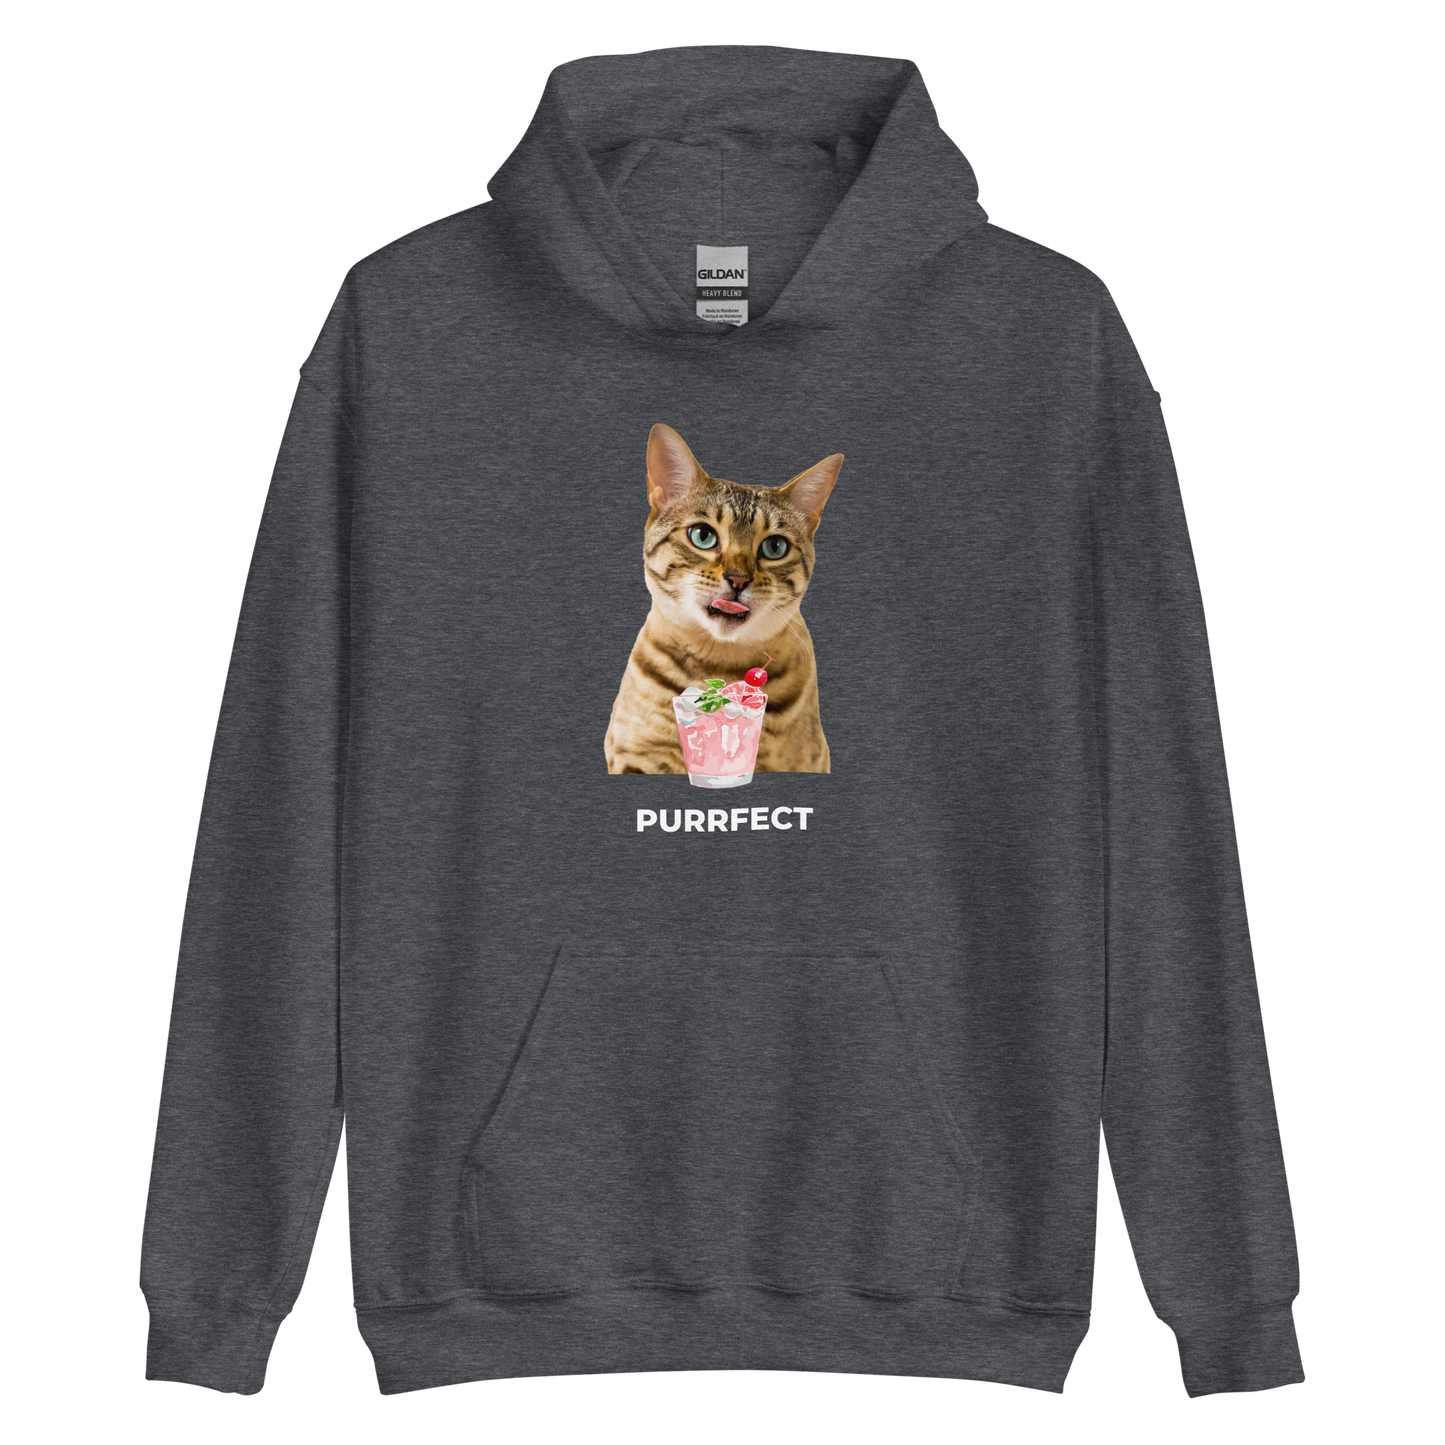 Dark Heather Cat Hoodie featuring an adorable Purrfect graphic on the chest - Funny Graphic Cat Hoodies - Boozy Fox